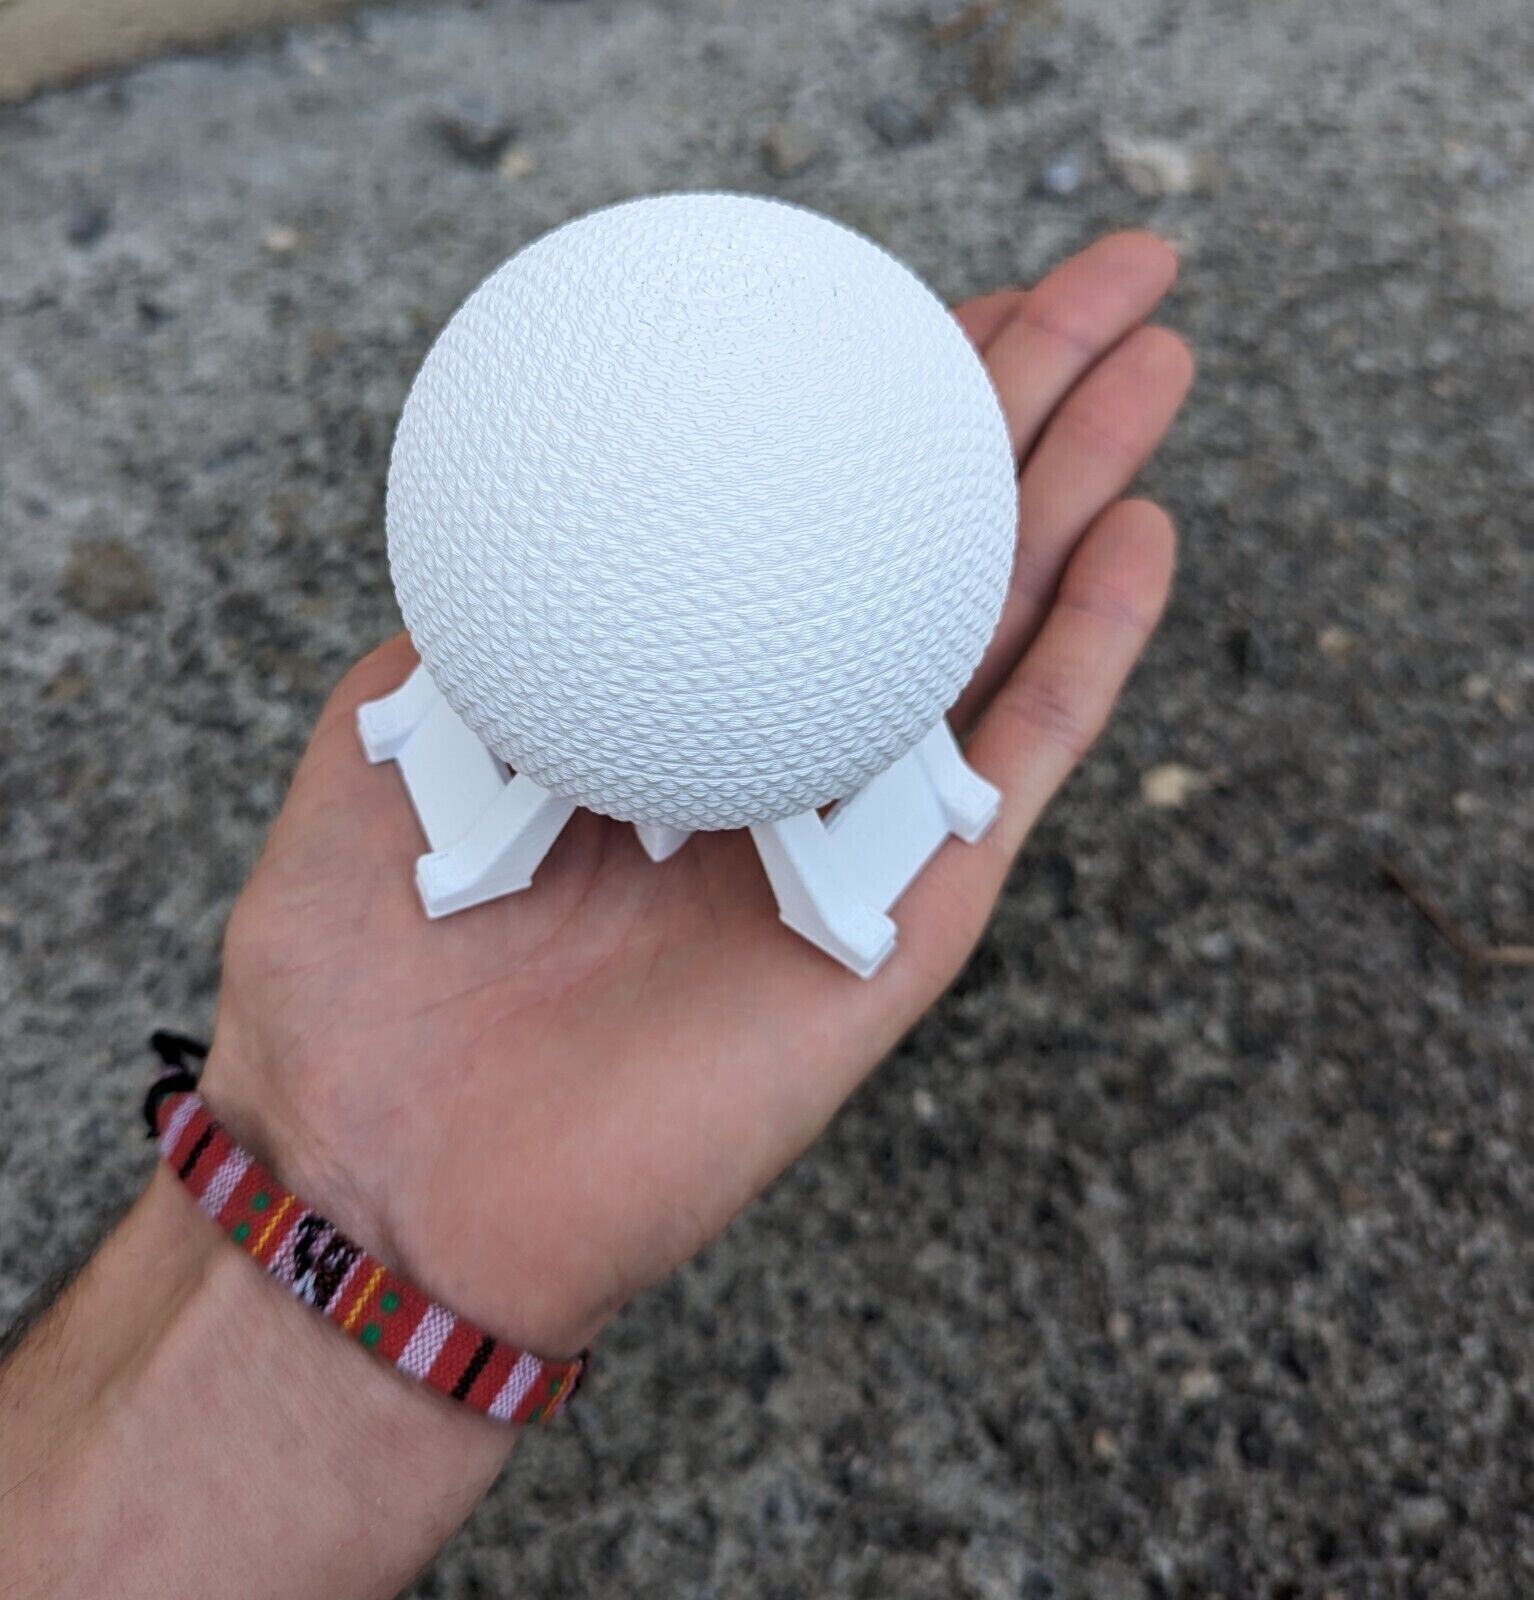 3D Printed Spaceship Earth Desk Ornament for Disney Epcot